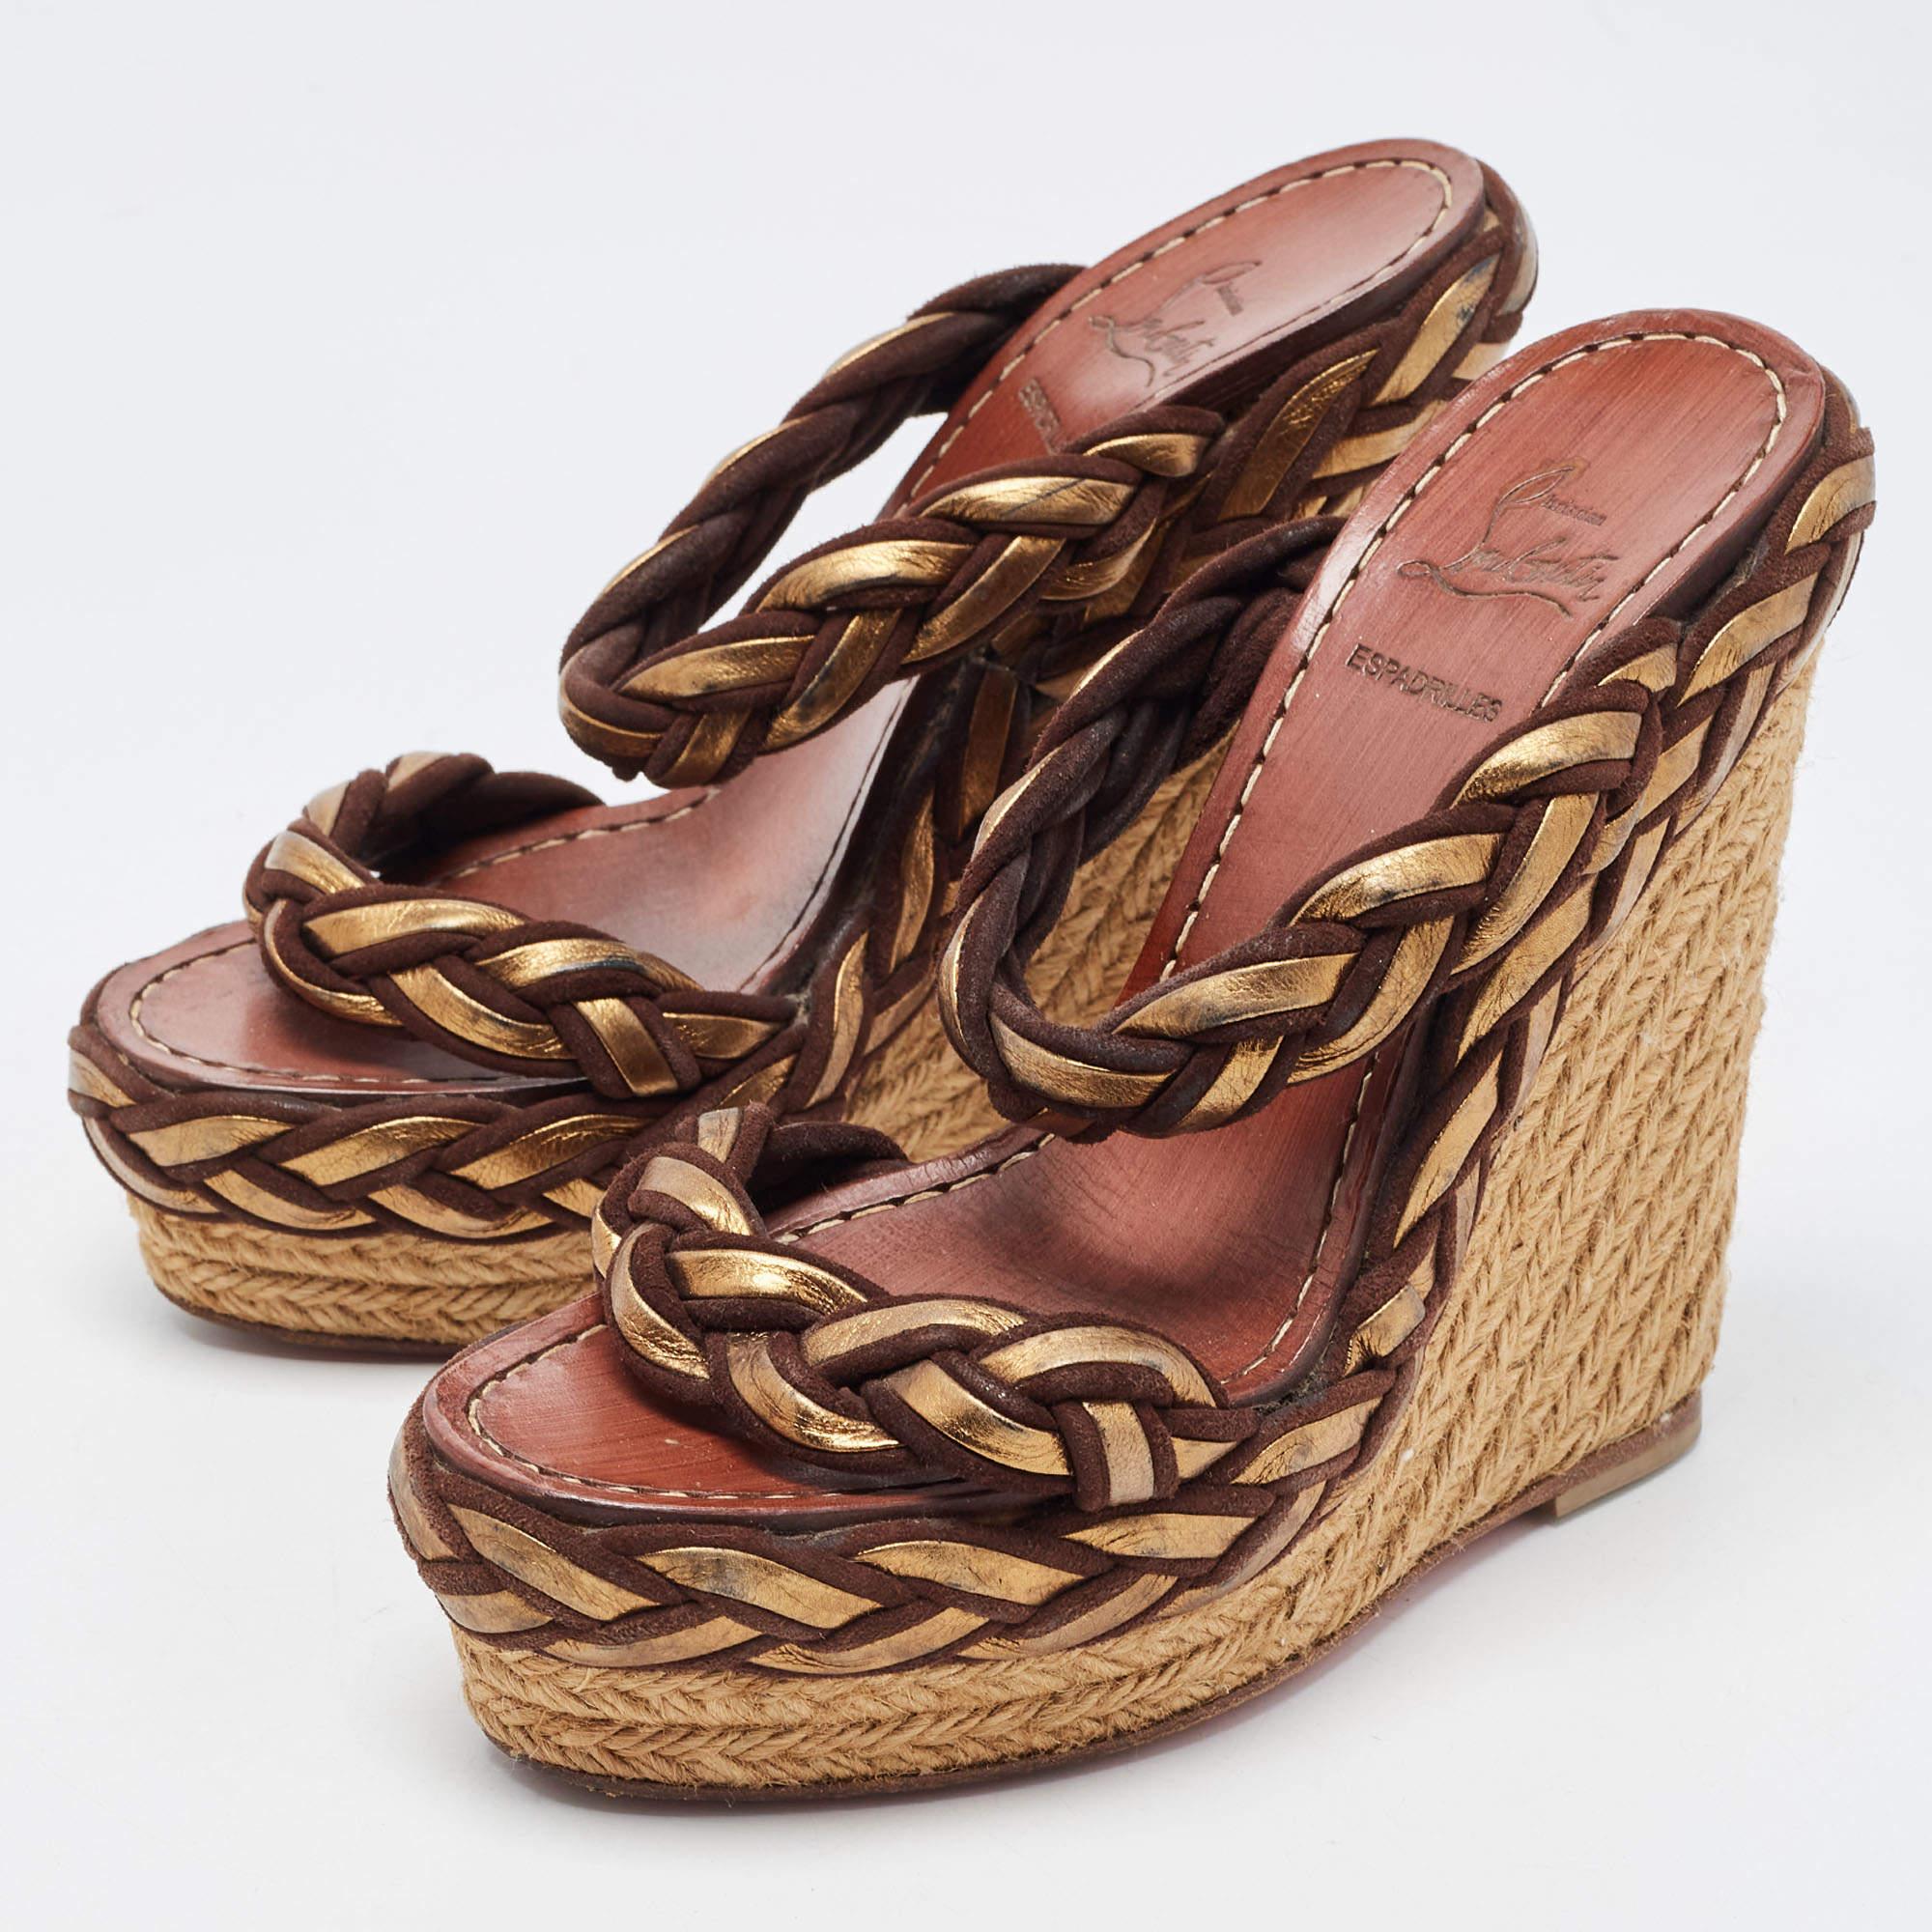 Women's Christian Louboutin Brown/Gold Braided Leather and Suede Espadrille Wedge Sandal